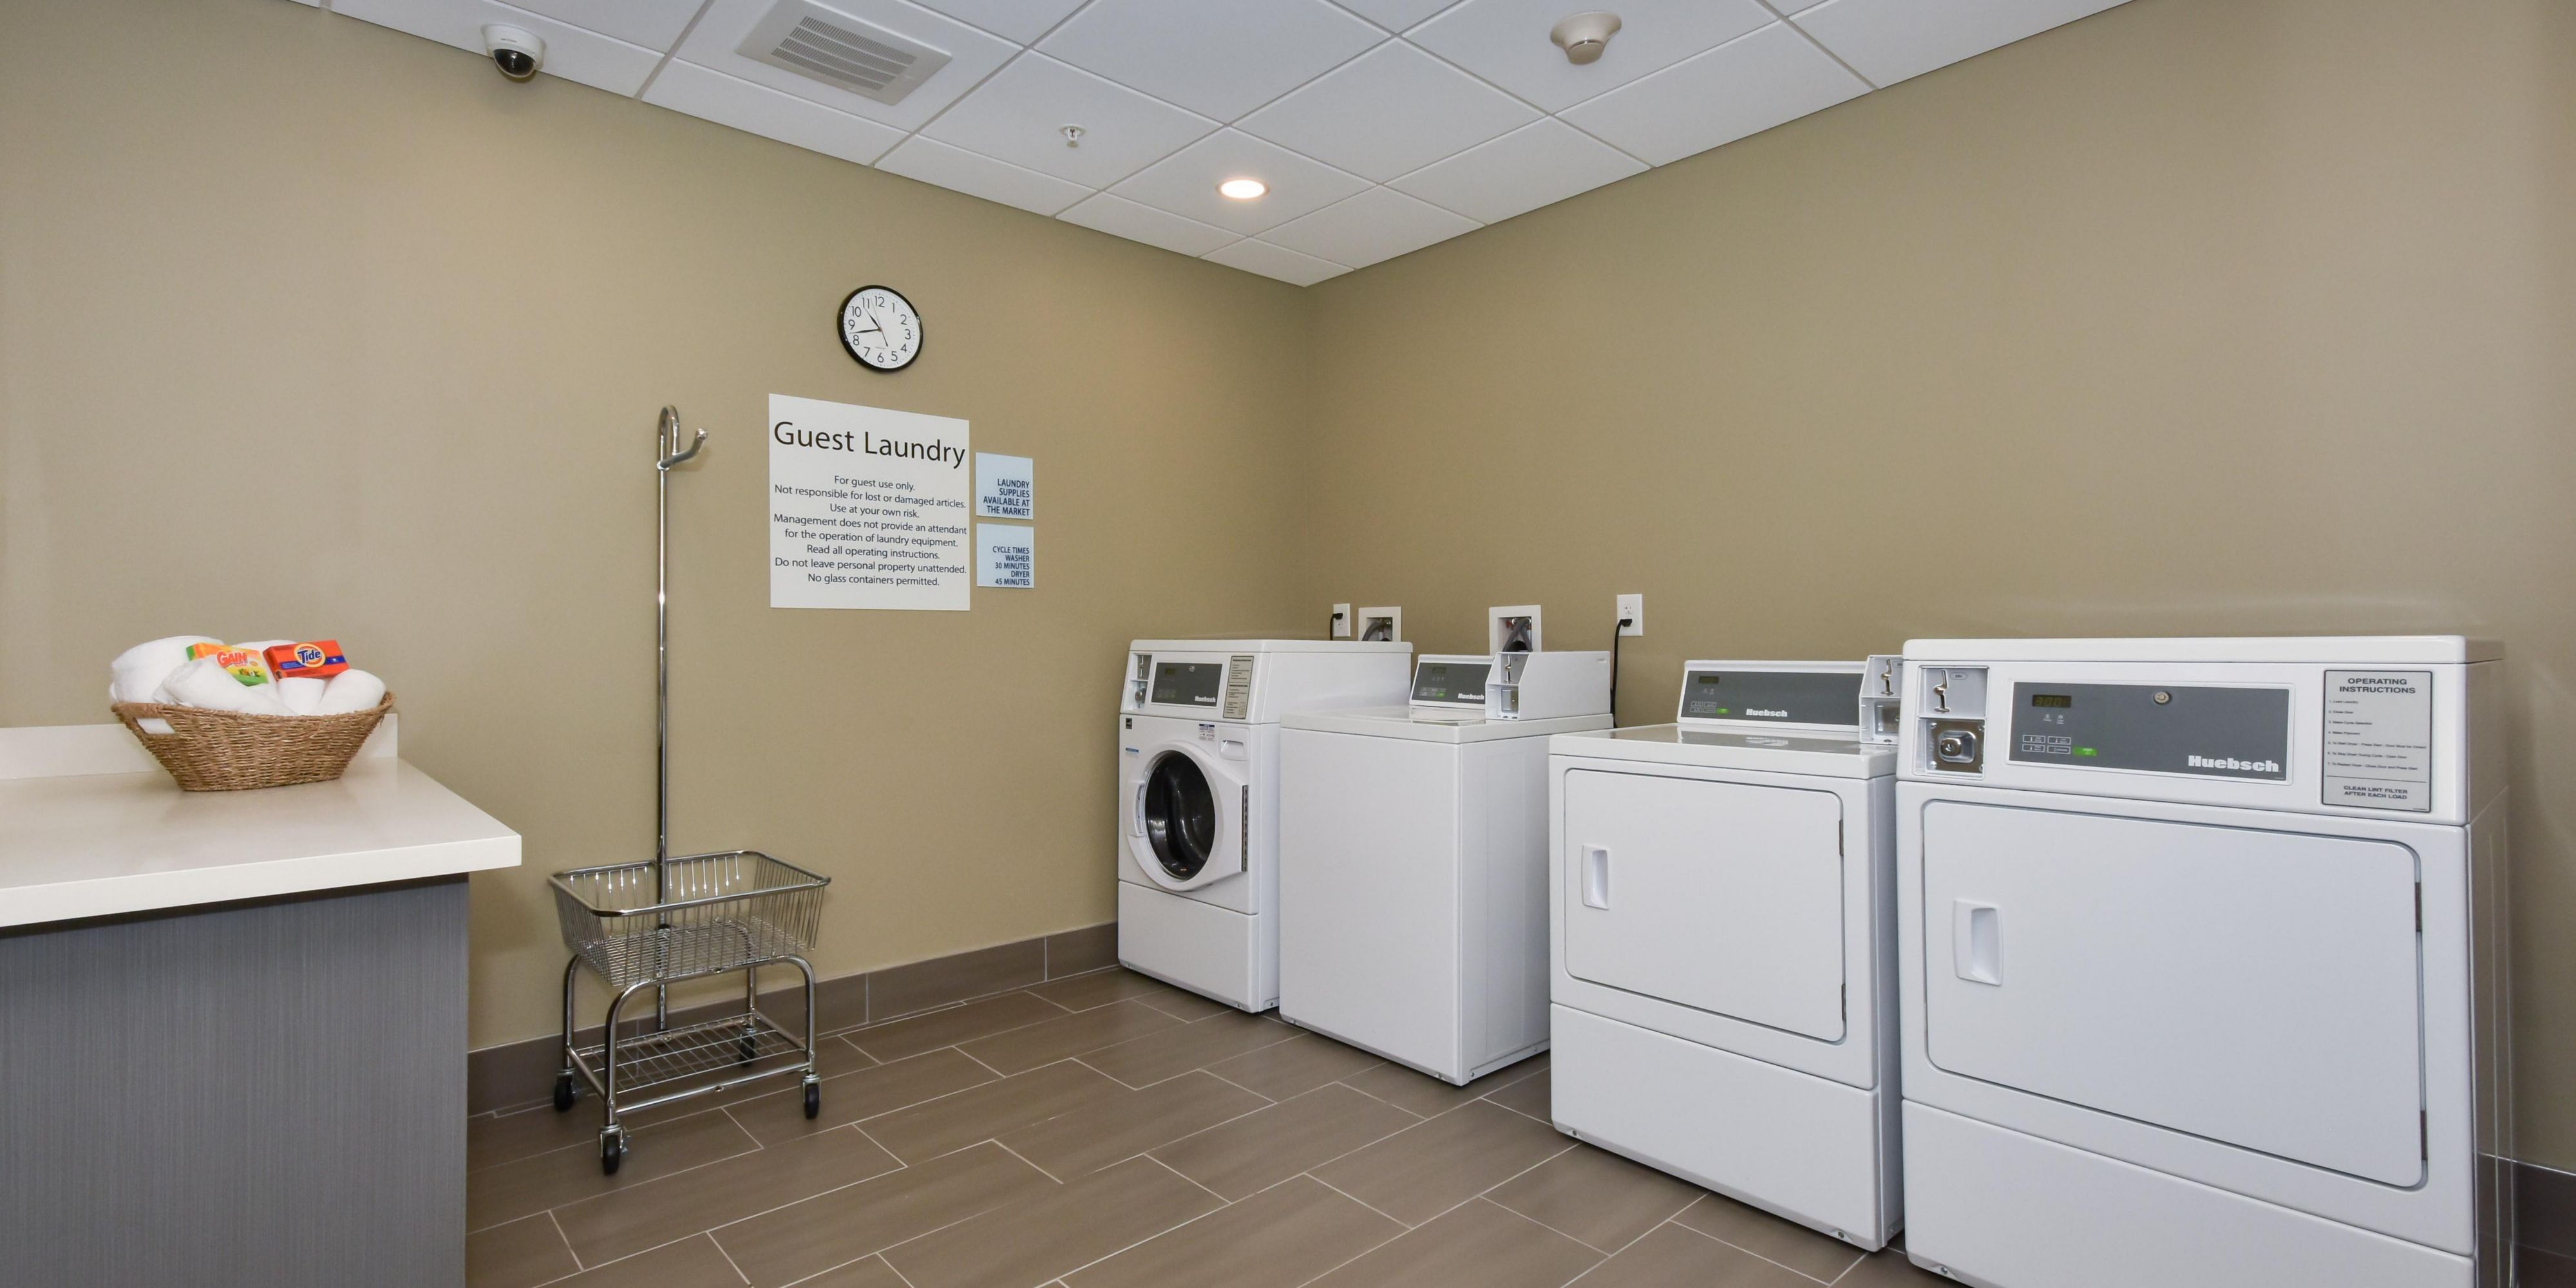 Onsite guest self laundry facilities are available 24 hours a day.